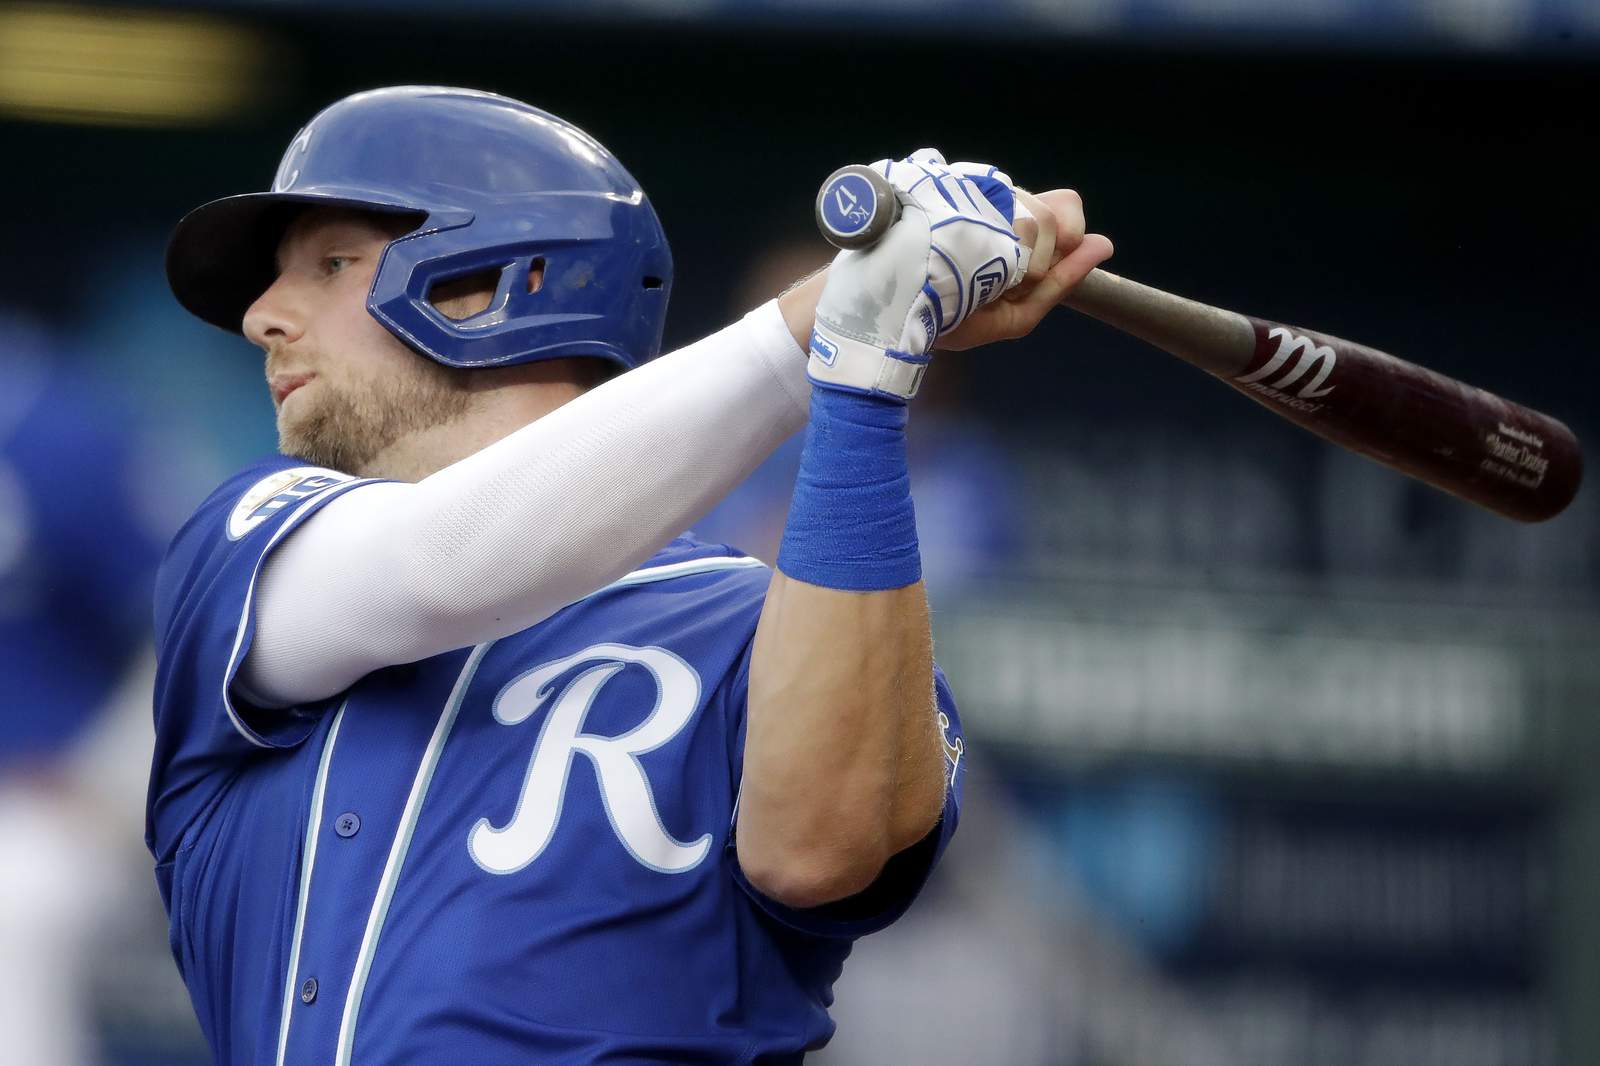 Royals' Dozier tests positive for COVID-19 before exhibition